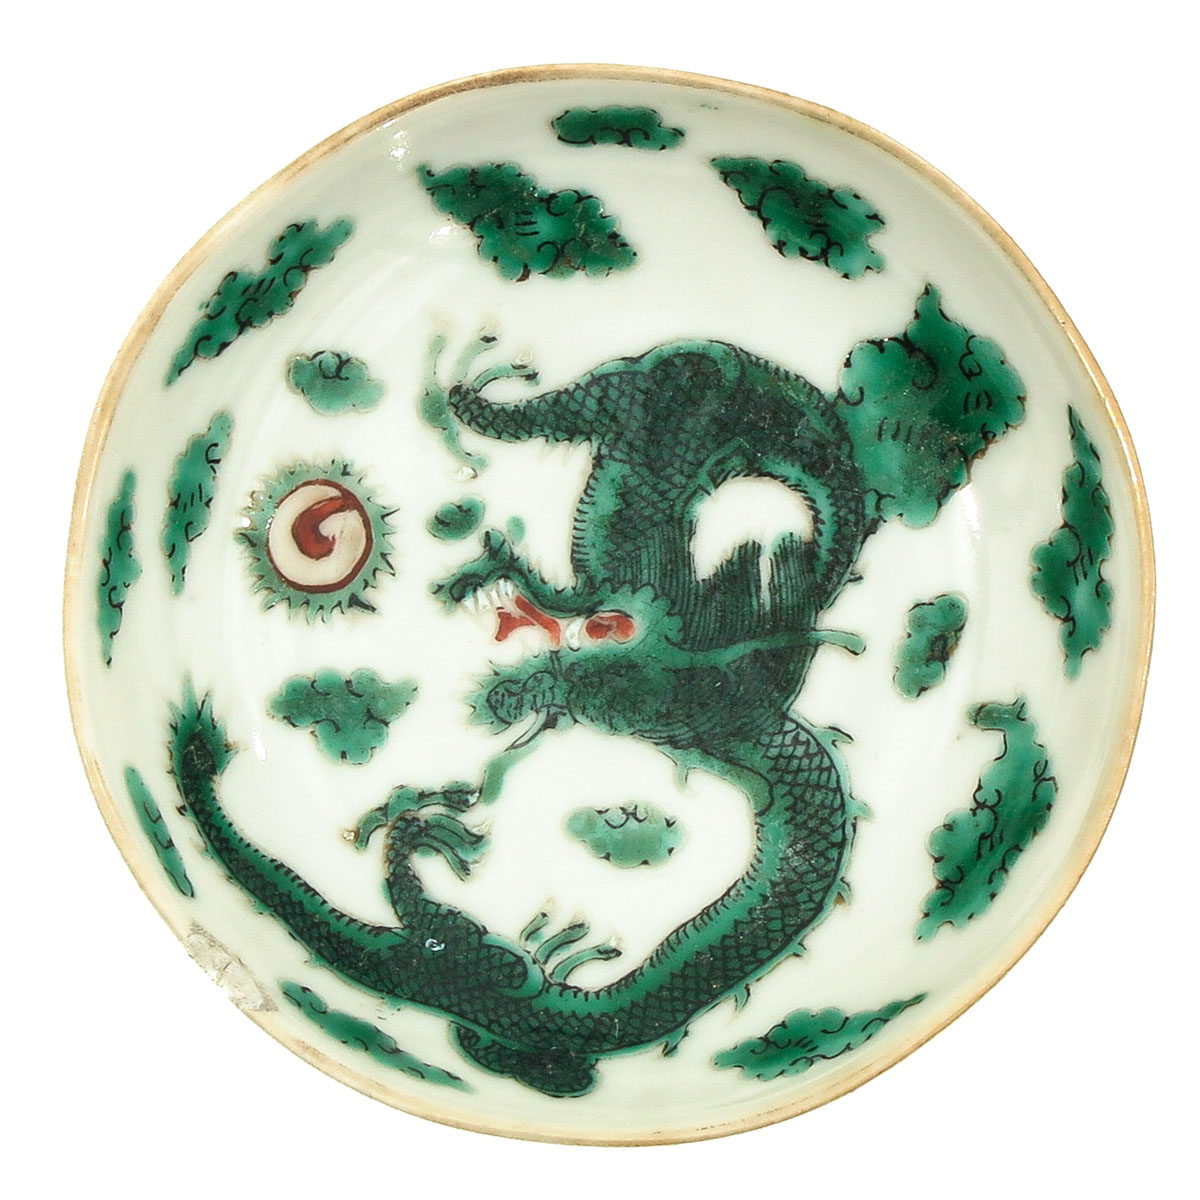 A Series of 5 Small Dragon Dishes - Image 7 of 10